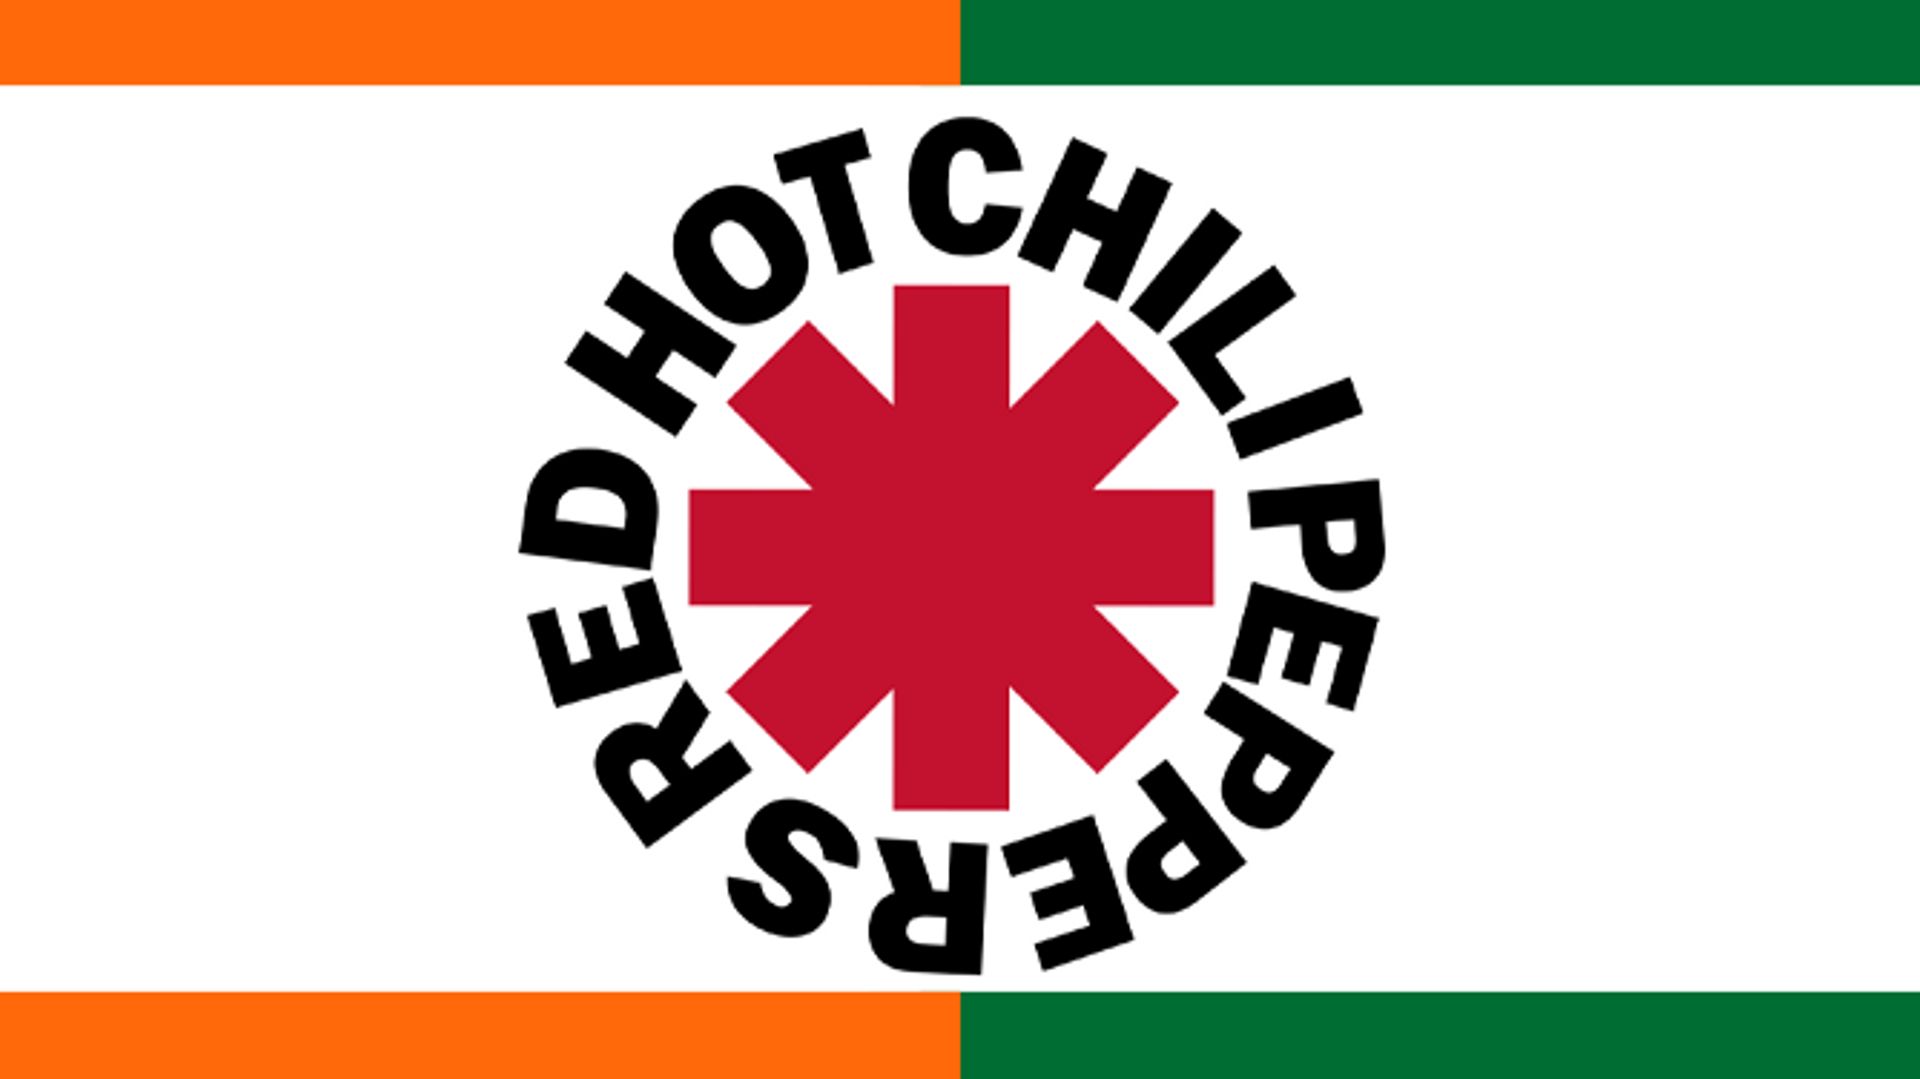 les-red-hot-chili-peppers-a-rock-werchter-2021